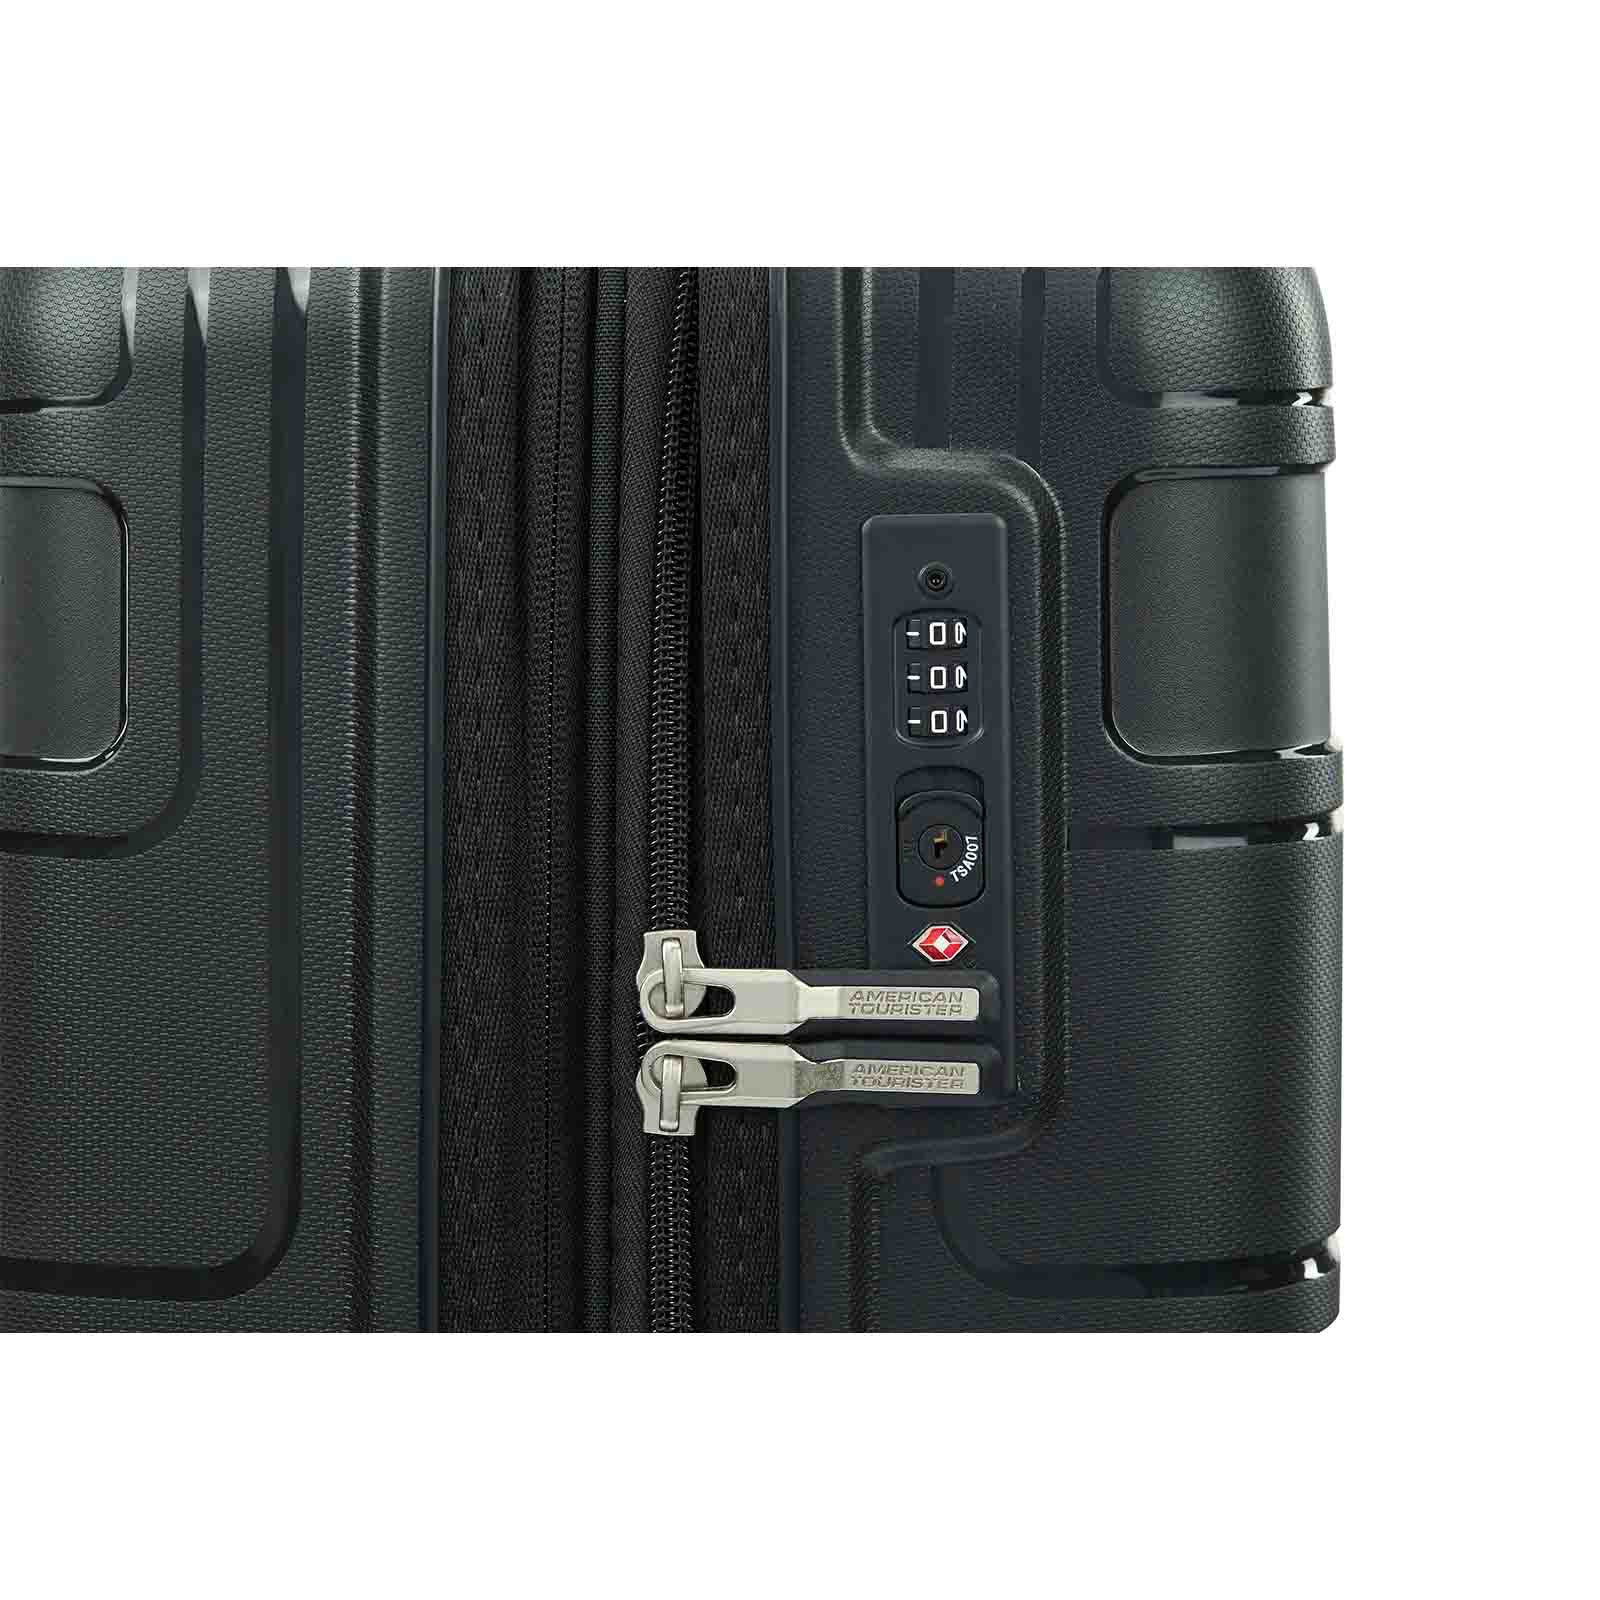 American-Tourister-Light-Max-55cm-Carry-On-Suitcase-Black-Lock